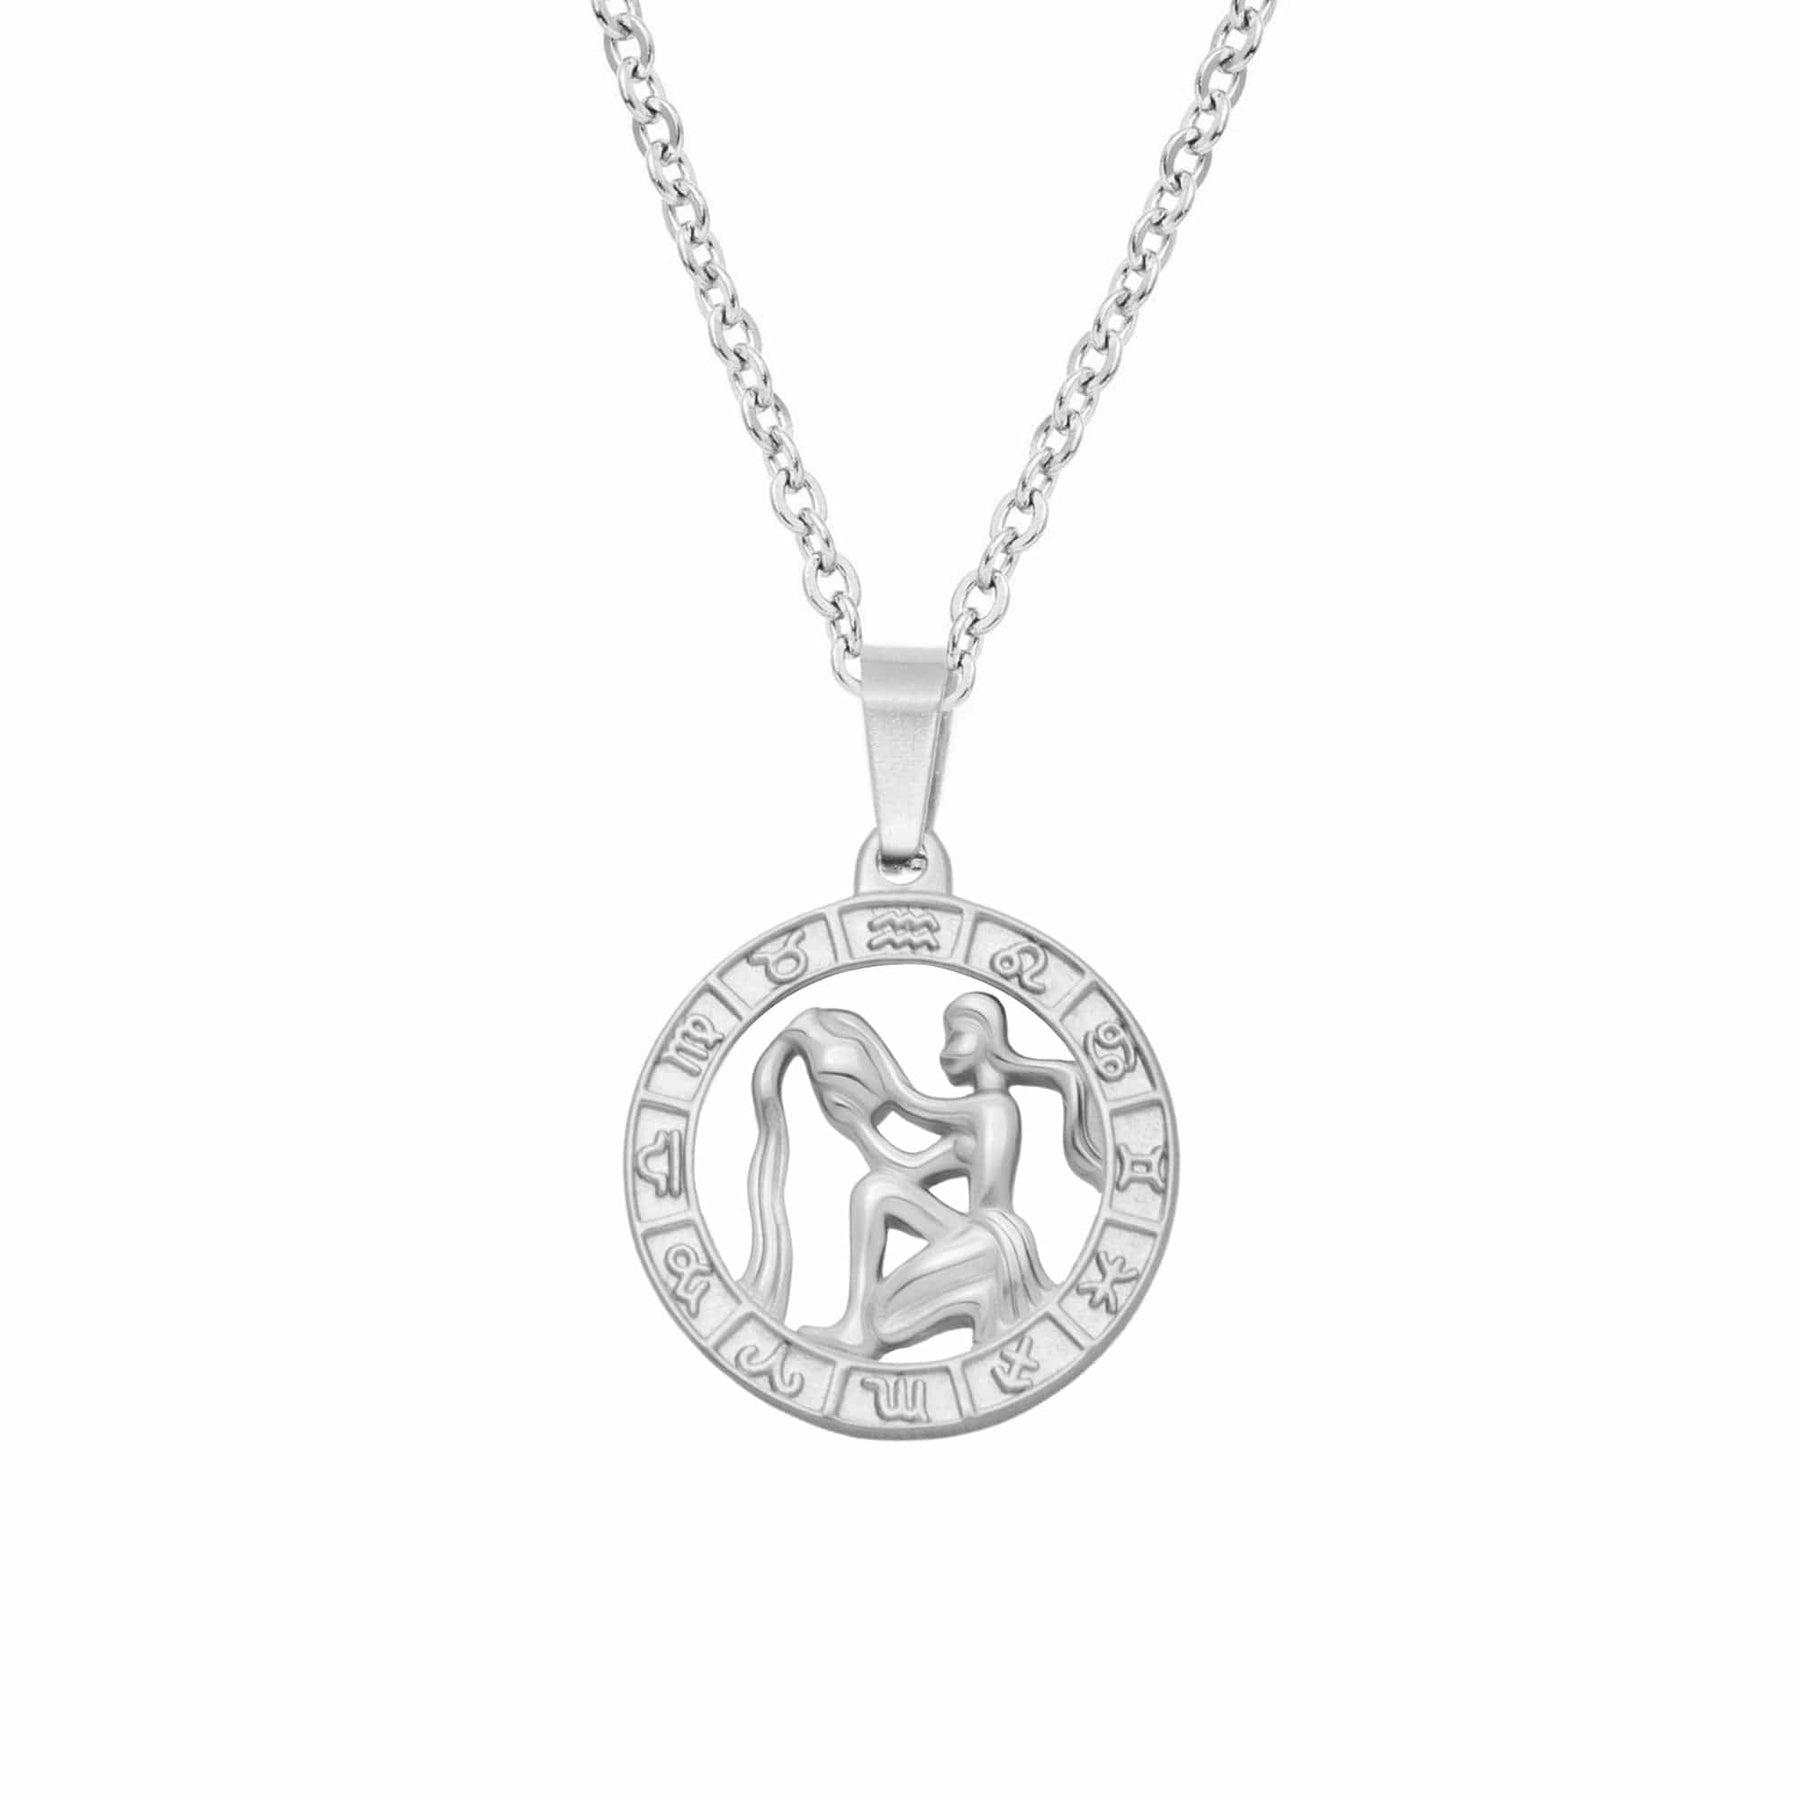 BohoMoon Stainless Steel Classic Zodiac Necklace Silver / Aquarius